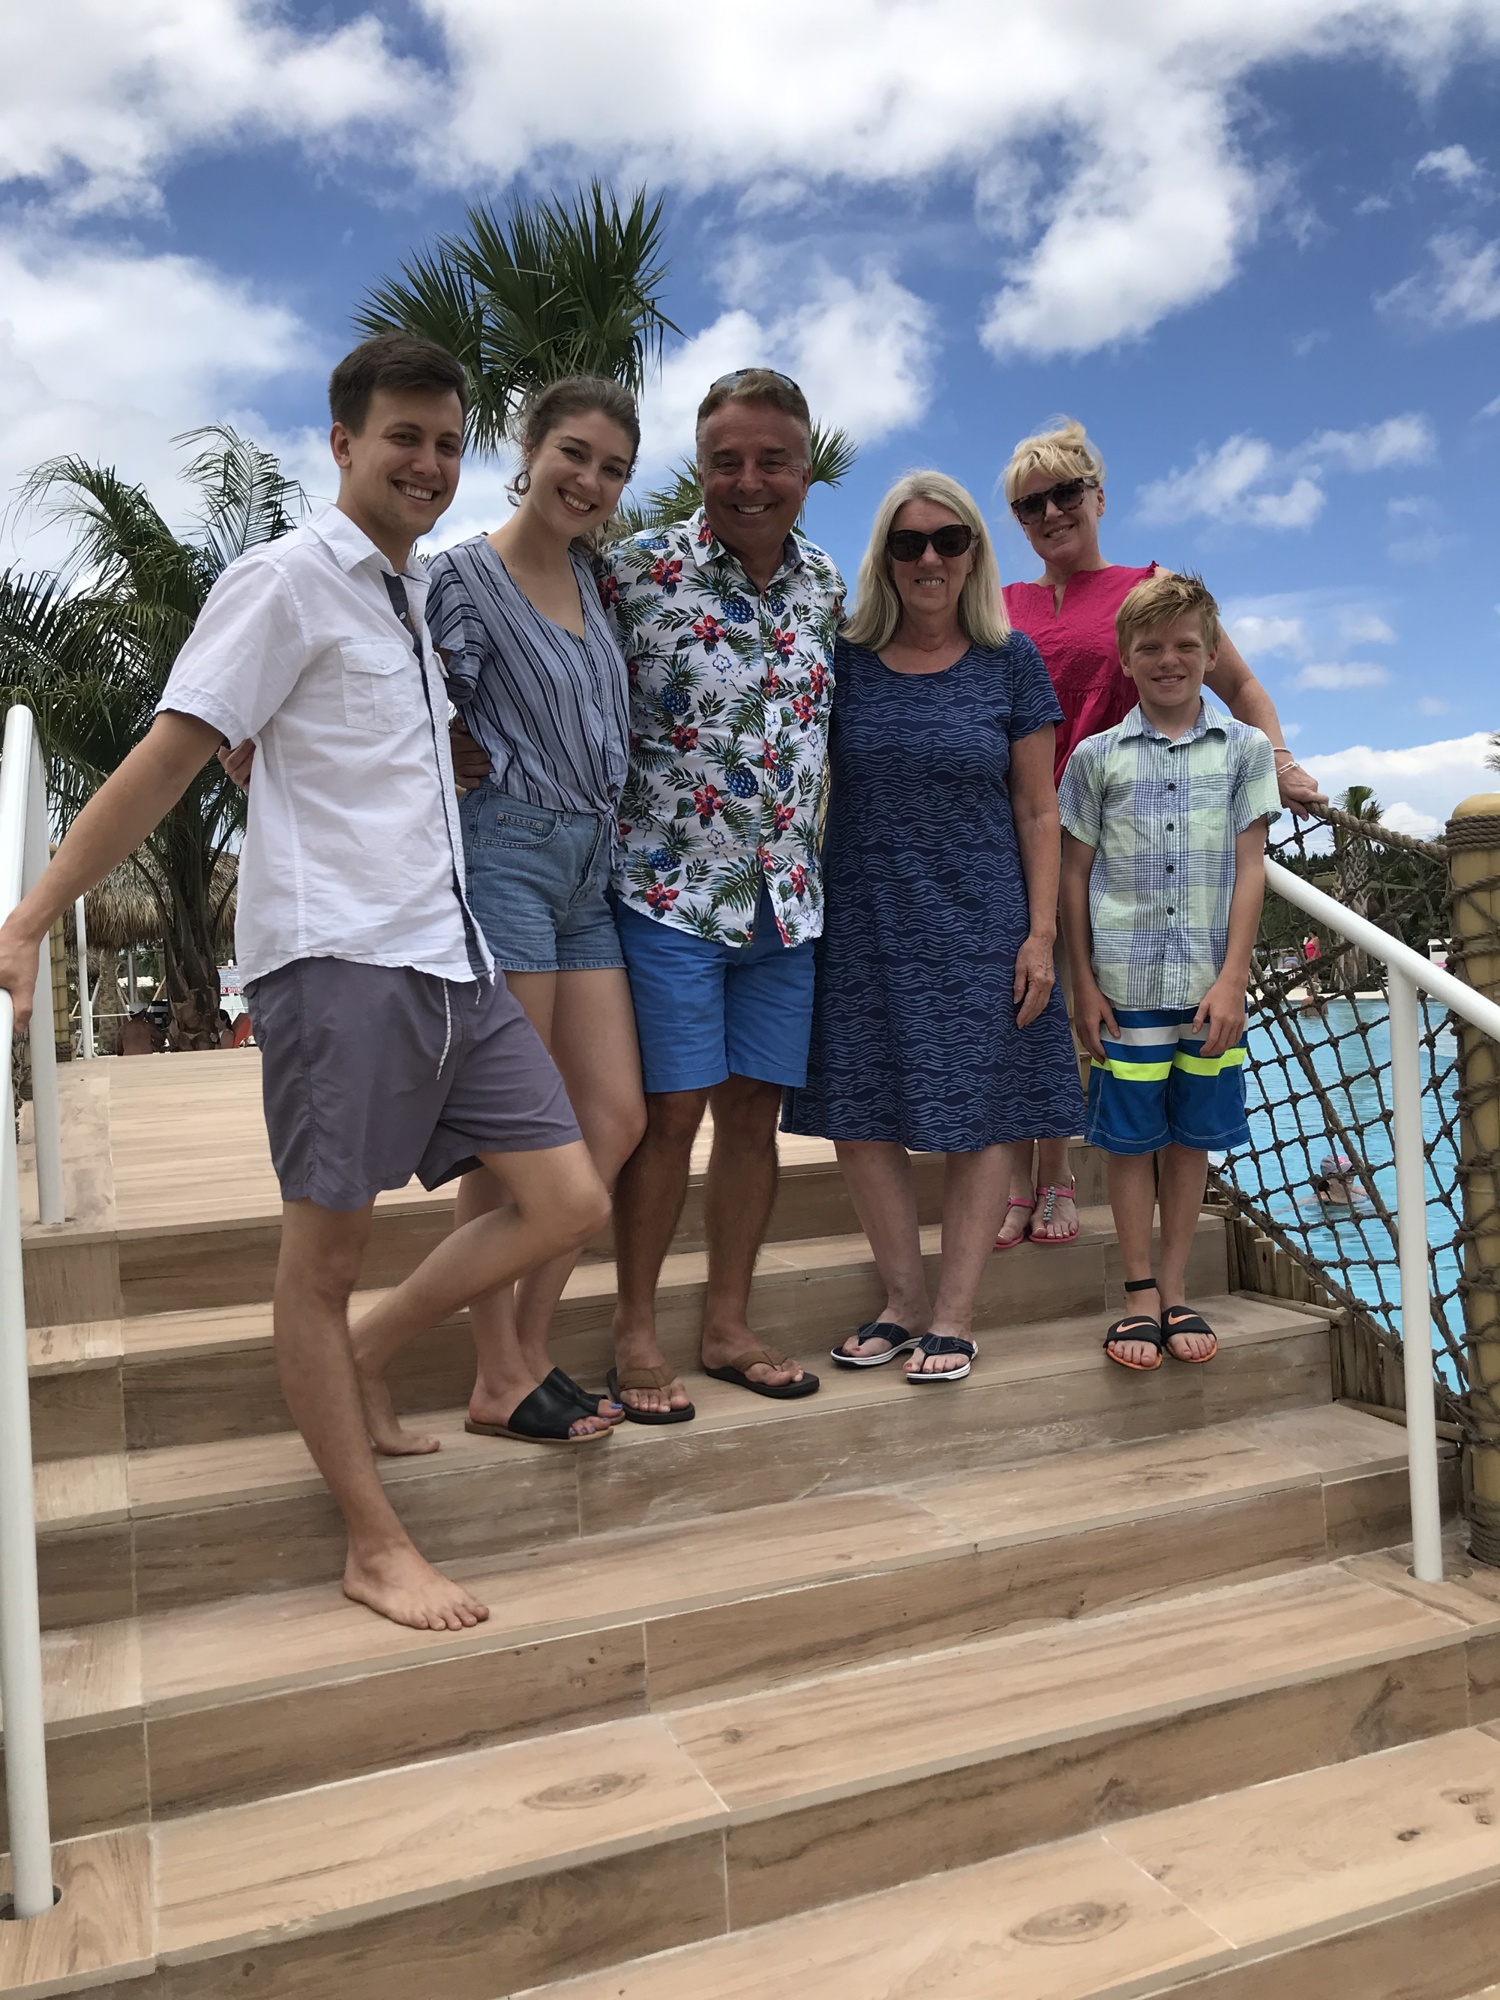 Brenden McNeil, Kaley McNeil, Michael McLean, Lisa  McLean, Jennifer Twilley and Jake Twilley on the bridge over the Latitude Margaritaville community pool. Courtesy photo